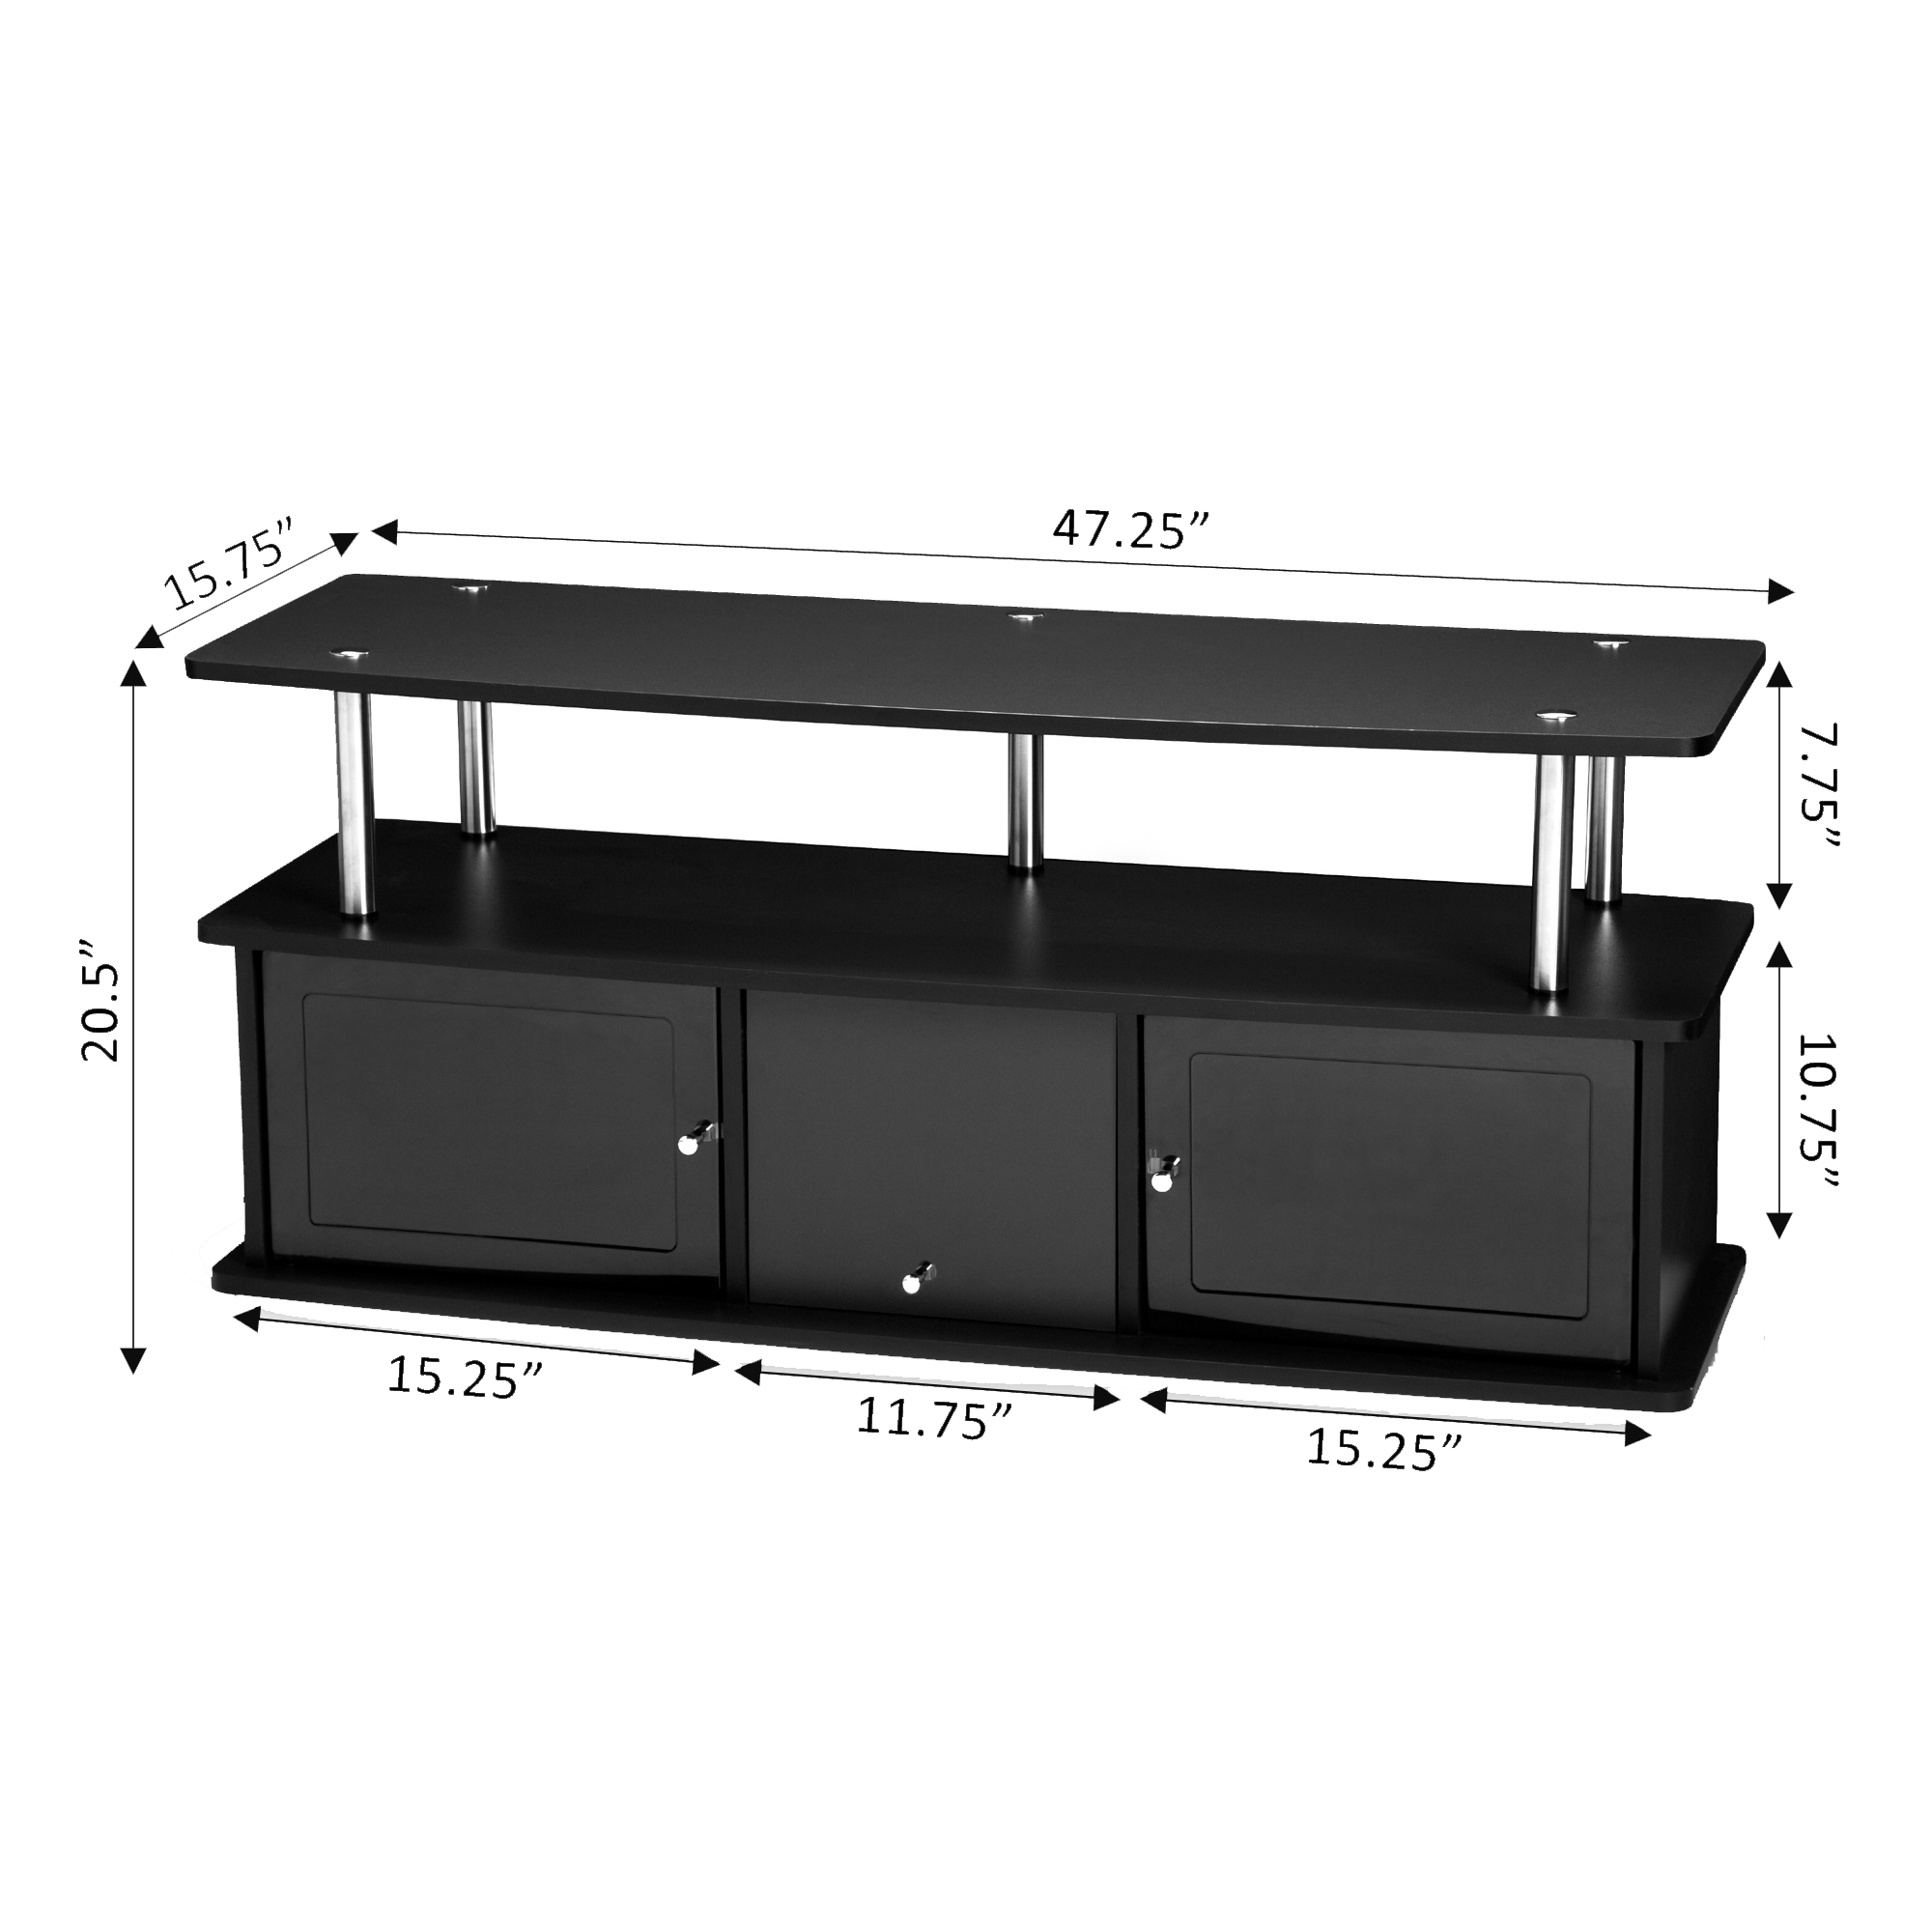 Convenience Concepts Designs2Go Cherry TV Stand with 3 Cabinets for TVs up to 50", Black - image 5 of 5